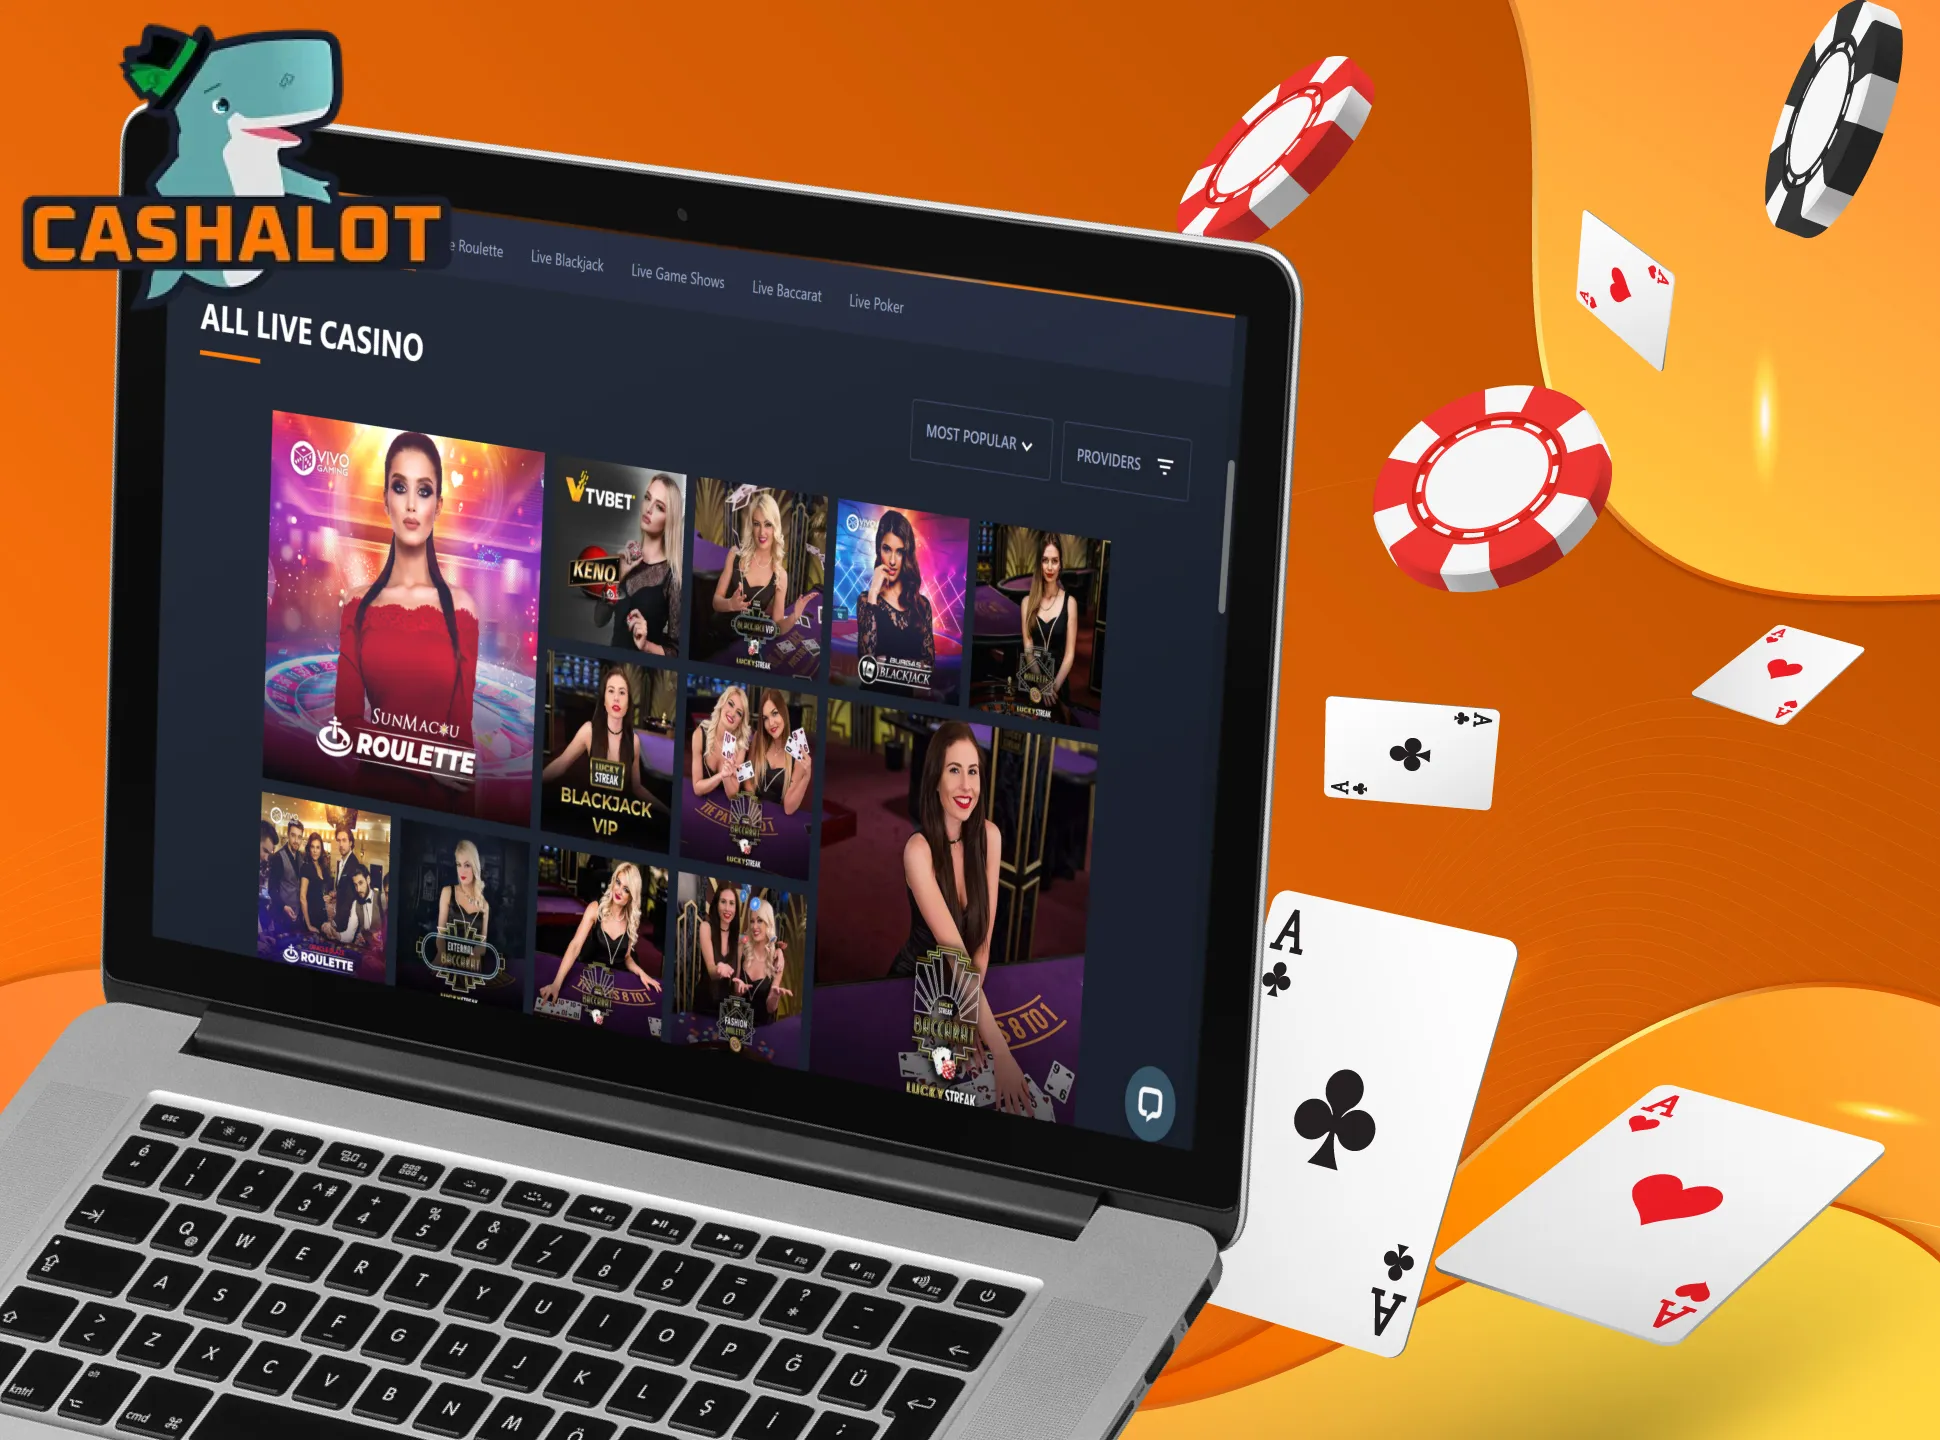 Play at the Cashalot live casino with real people.